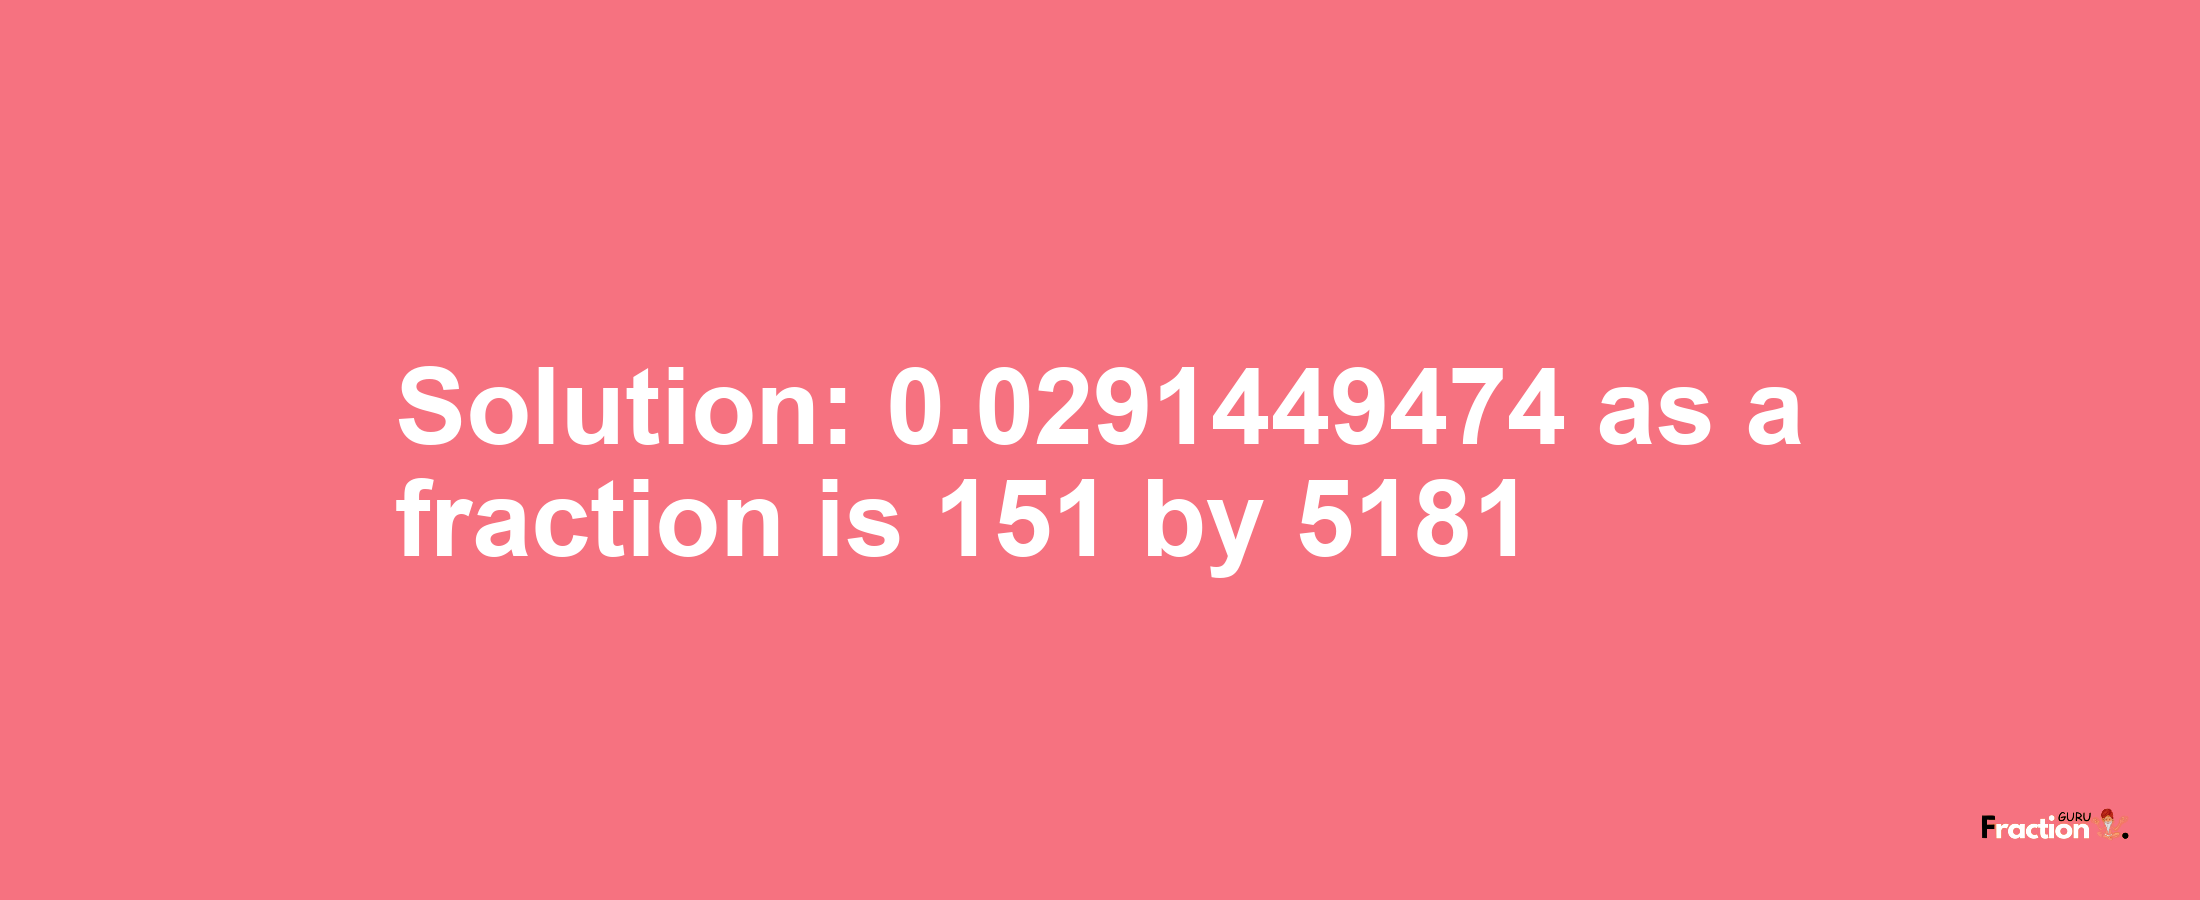 Solution:0.0291449474 as a fraction is 151/5181